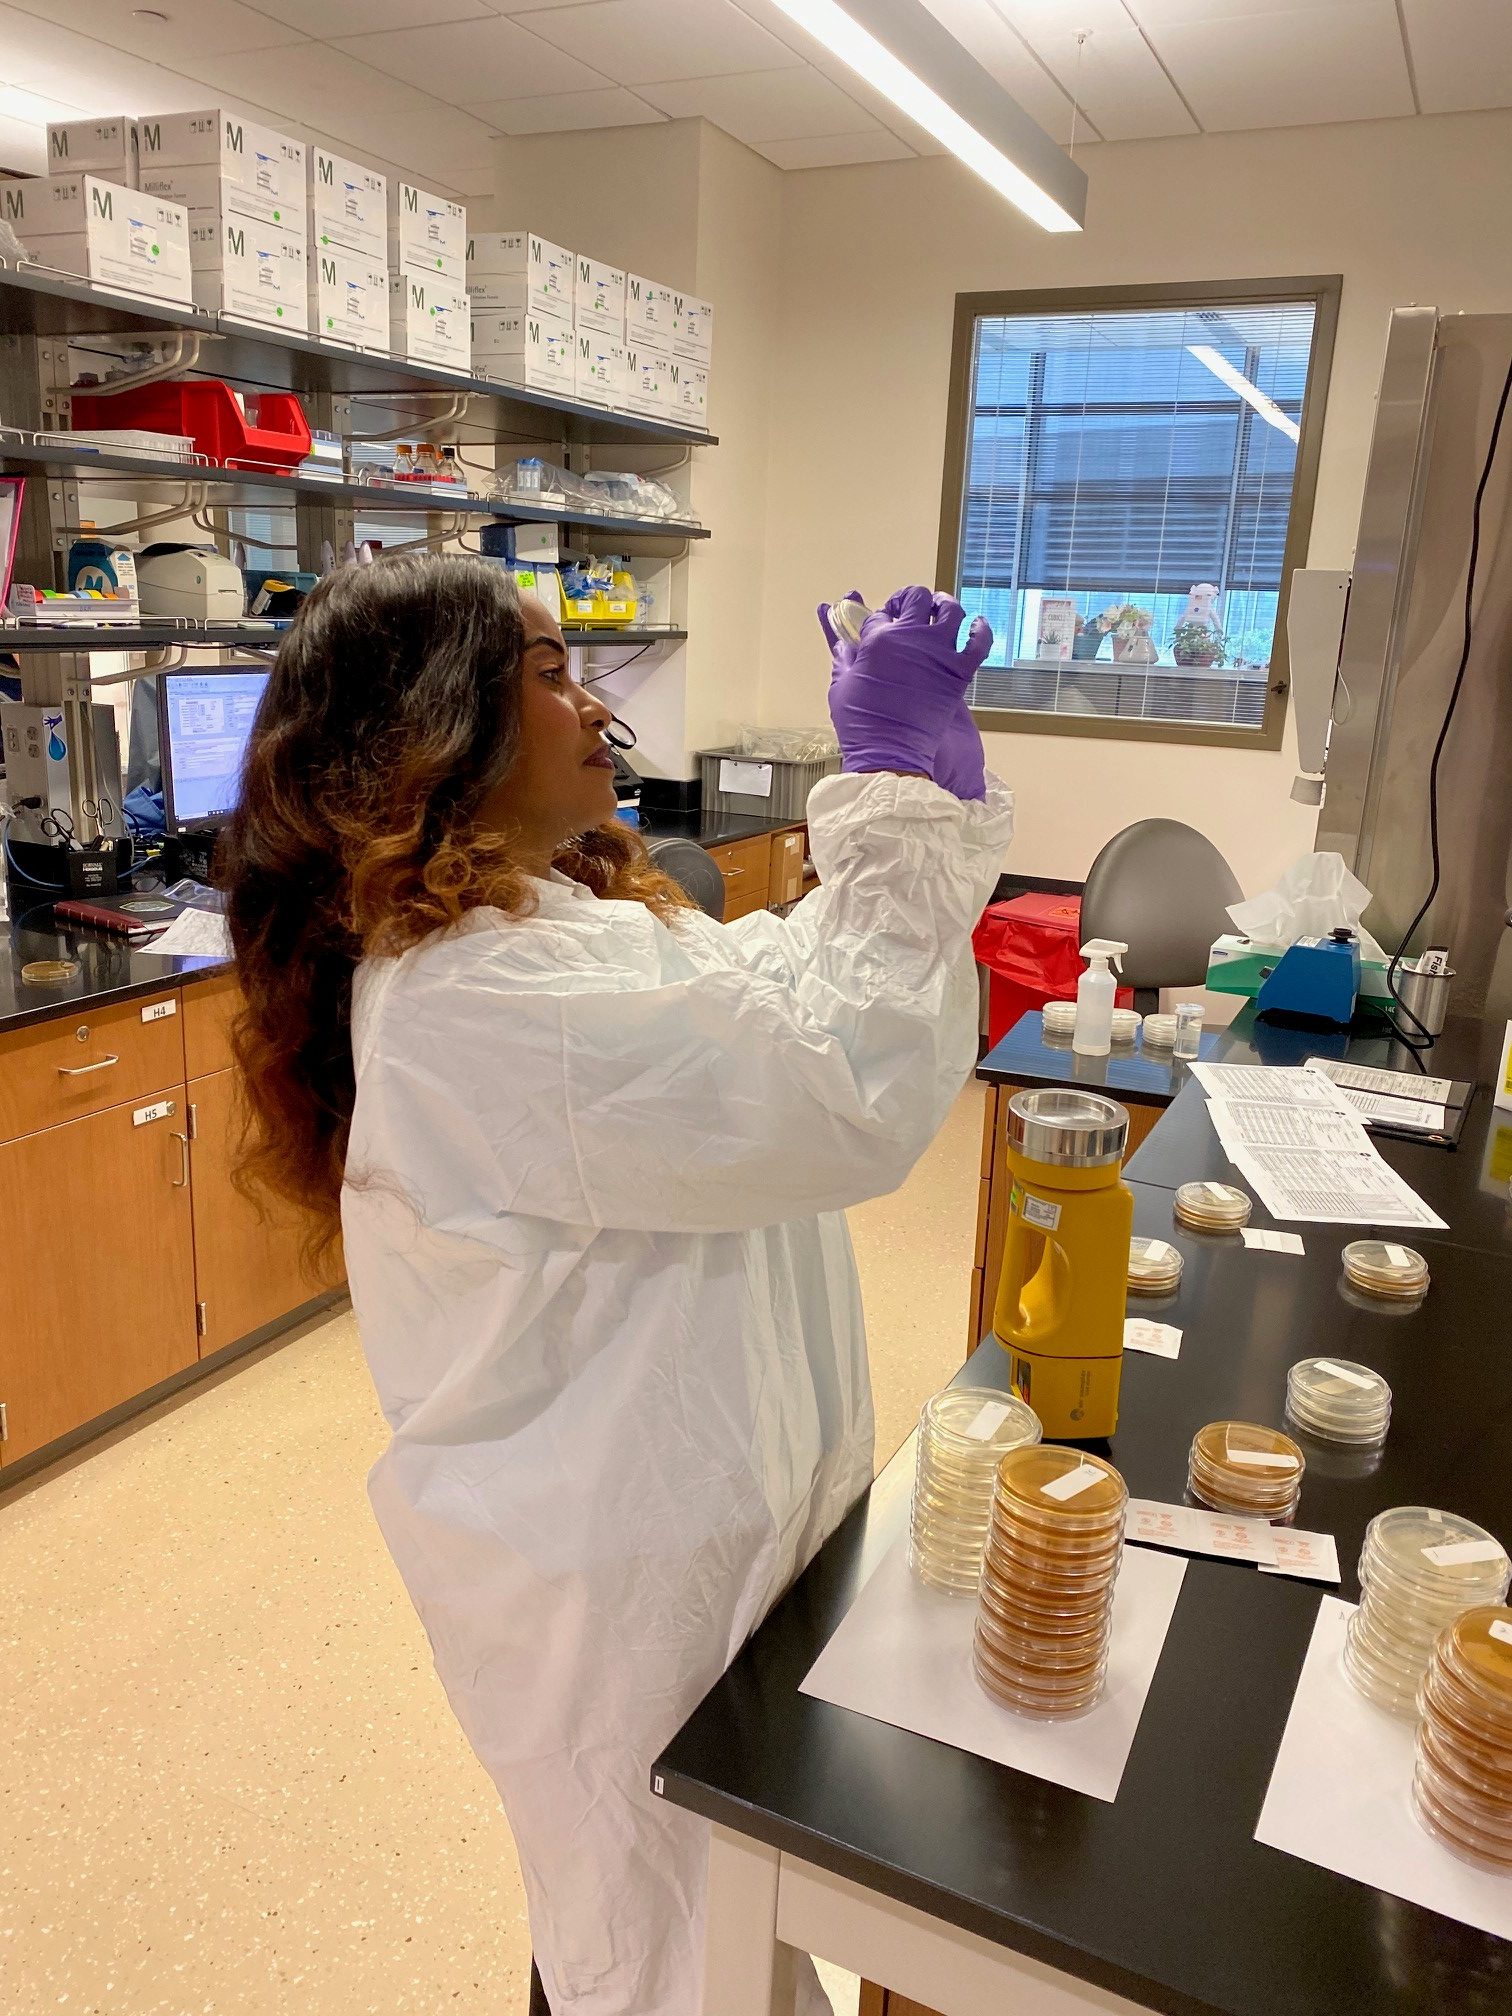 A woman in a white lab coat and purple gloves works in a laboratory. She is carefully holding a small vial or container up to eye level, examining its contents.